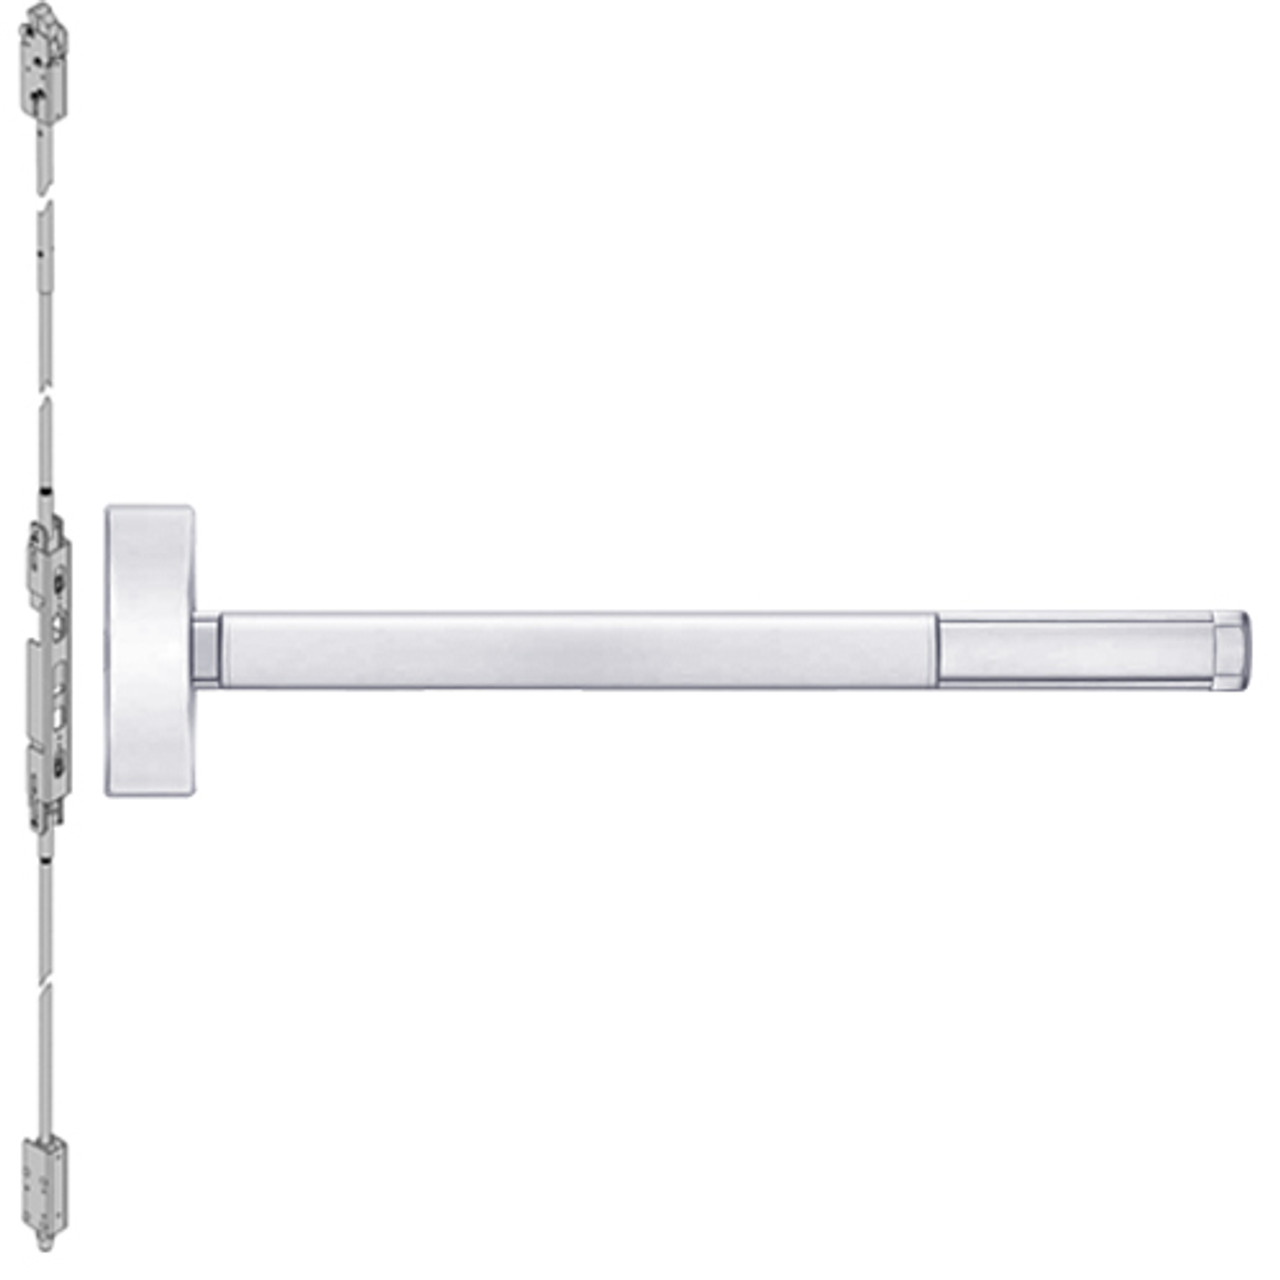 ELR2814-625-36 PHI 2800 Series Concealed Vertical Rod Exit Device with Electric Latch Retraction Prepped for Lever-Knob Always Active in Bright Chrome Finish